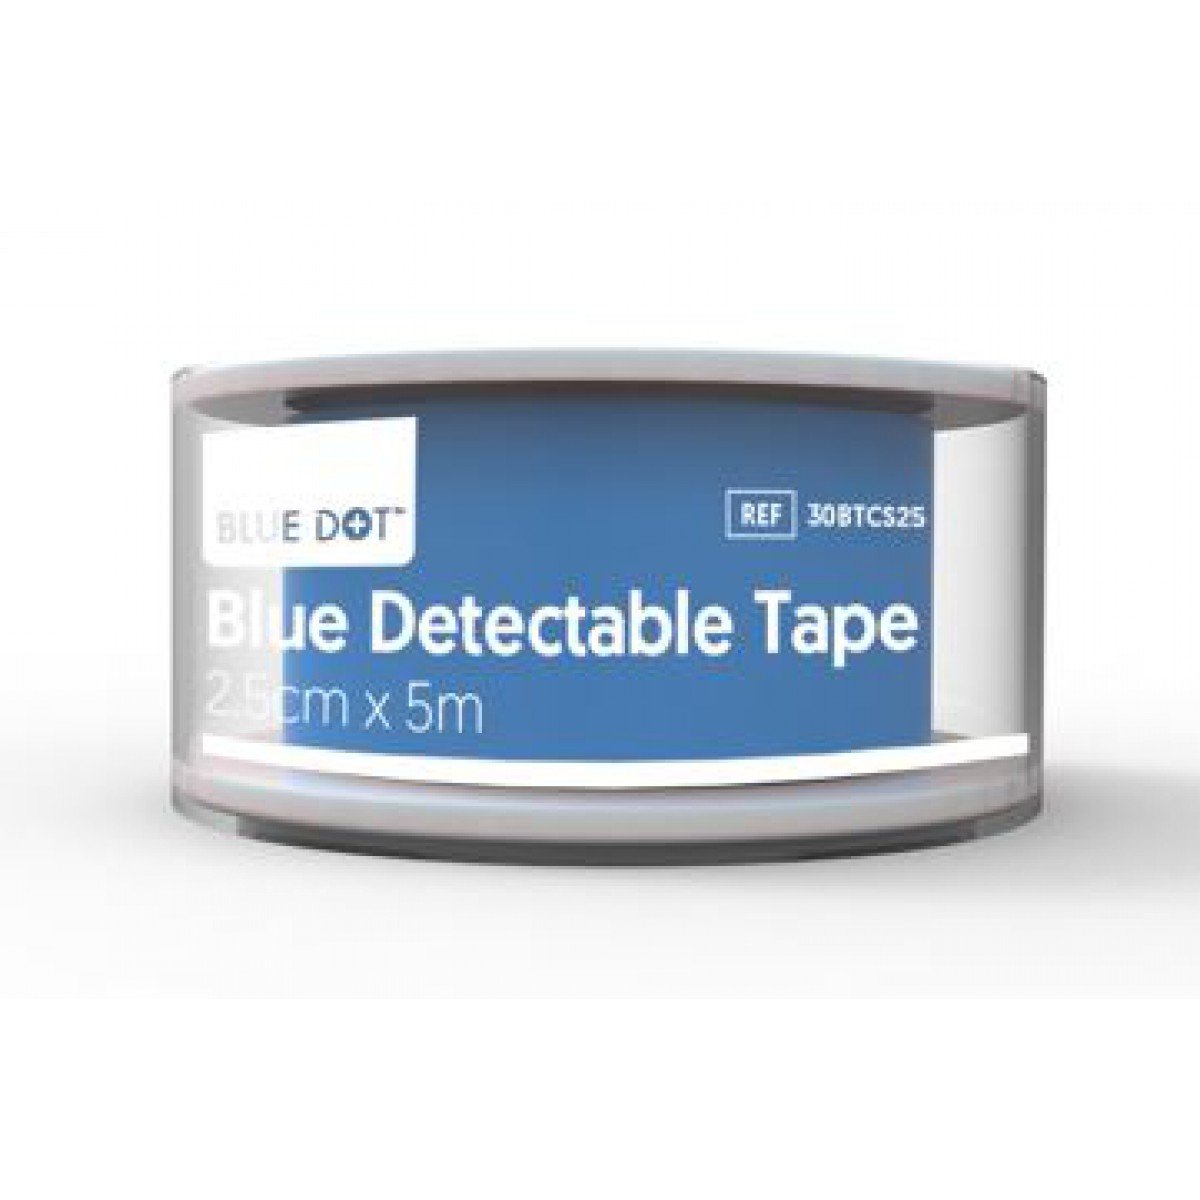 Visually Detectable Tape